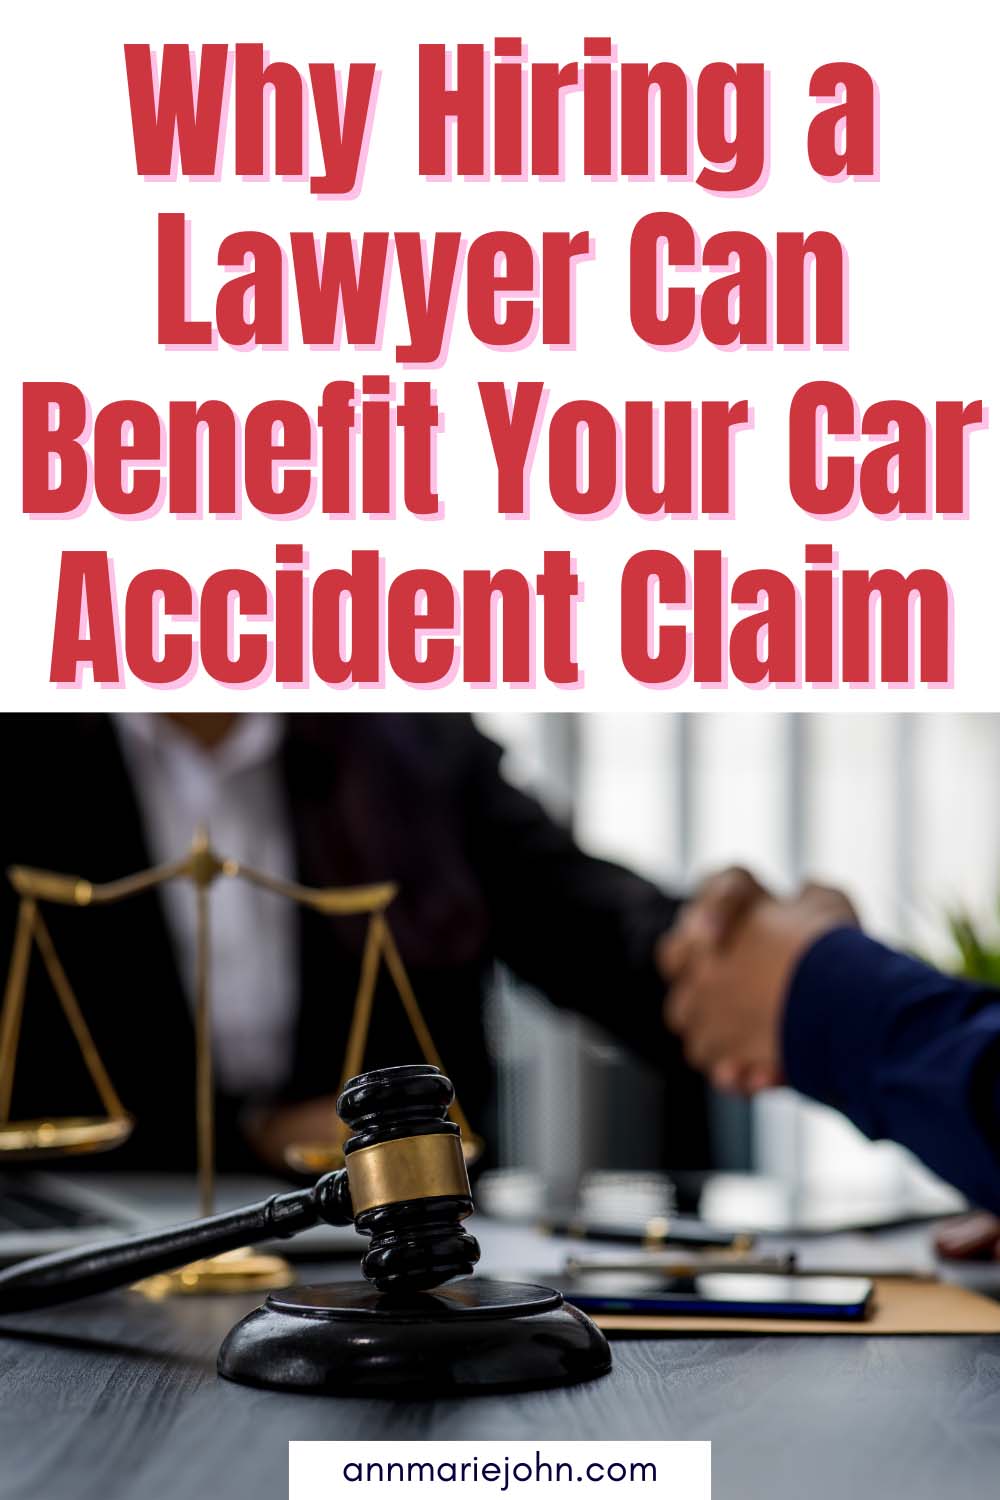 Why Hiring a Lawyer Can Benefit Your Car Accident Claim